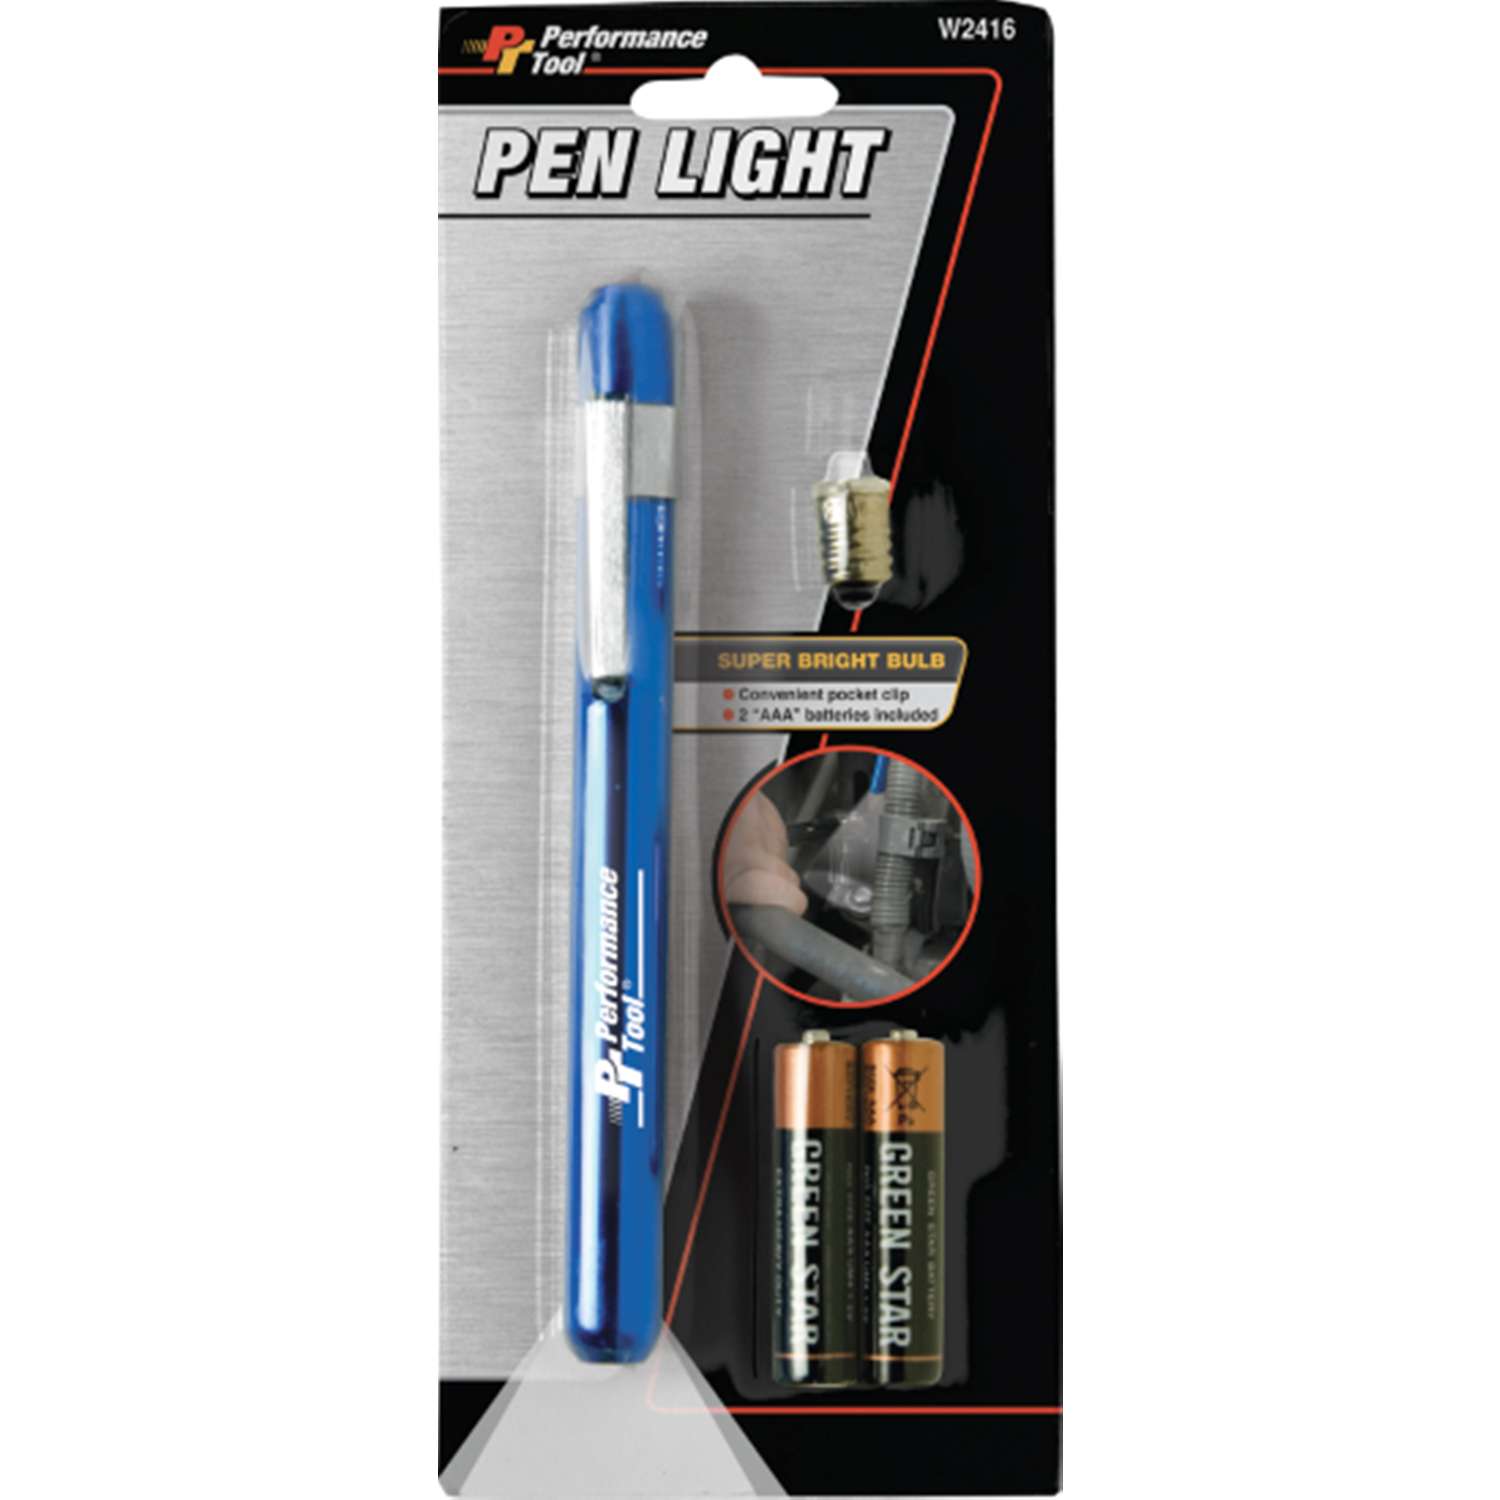 How to Change The Batteries in The Upgraded Bright Lights Drill Pen 